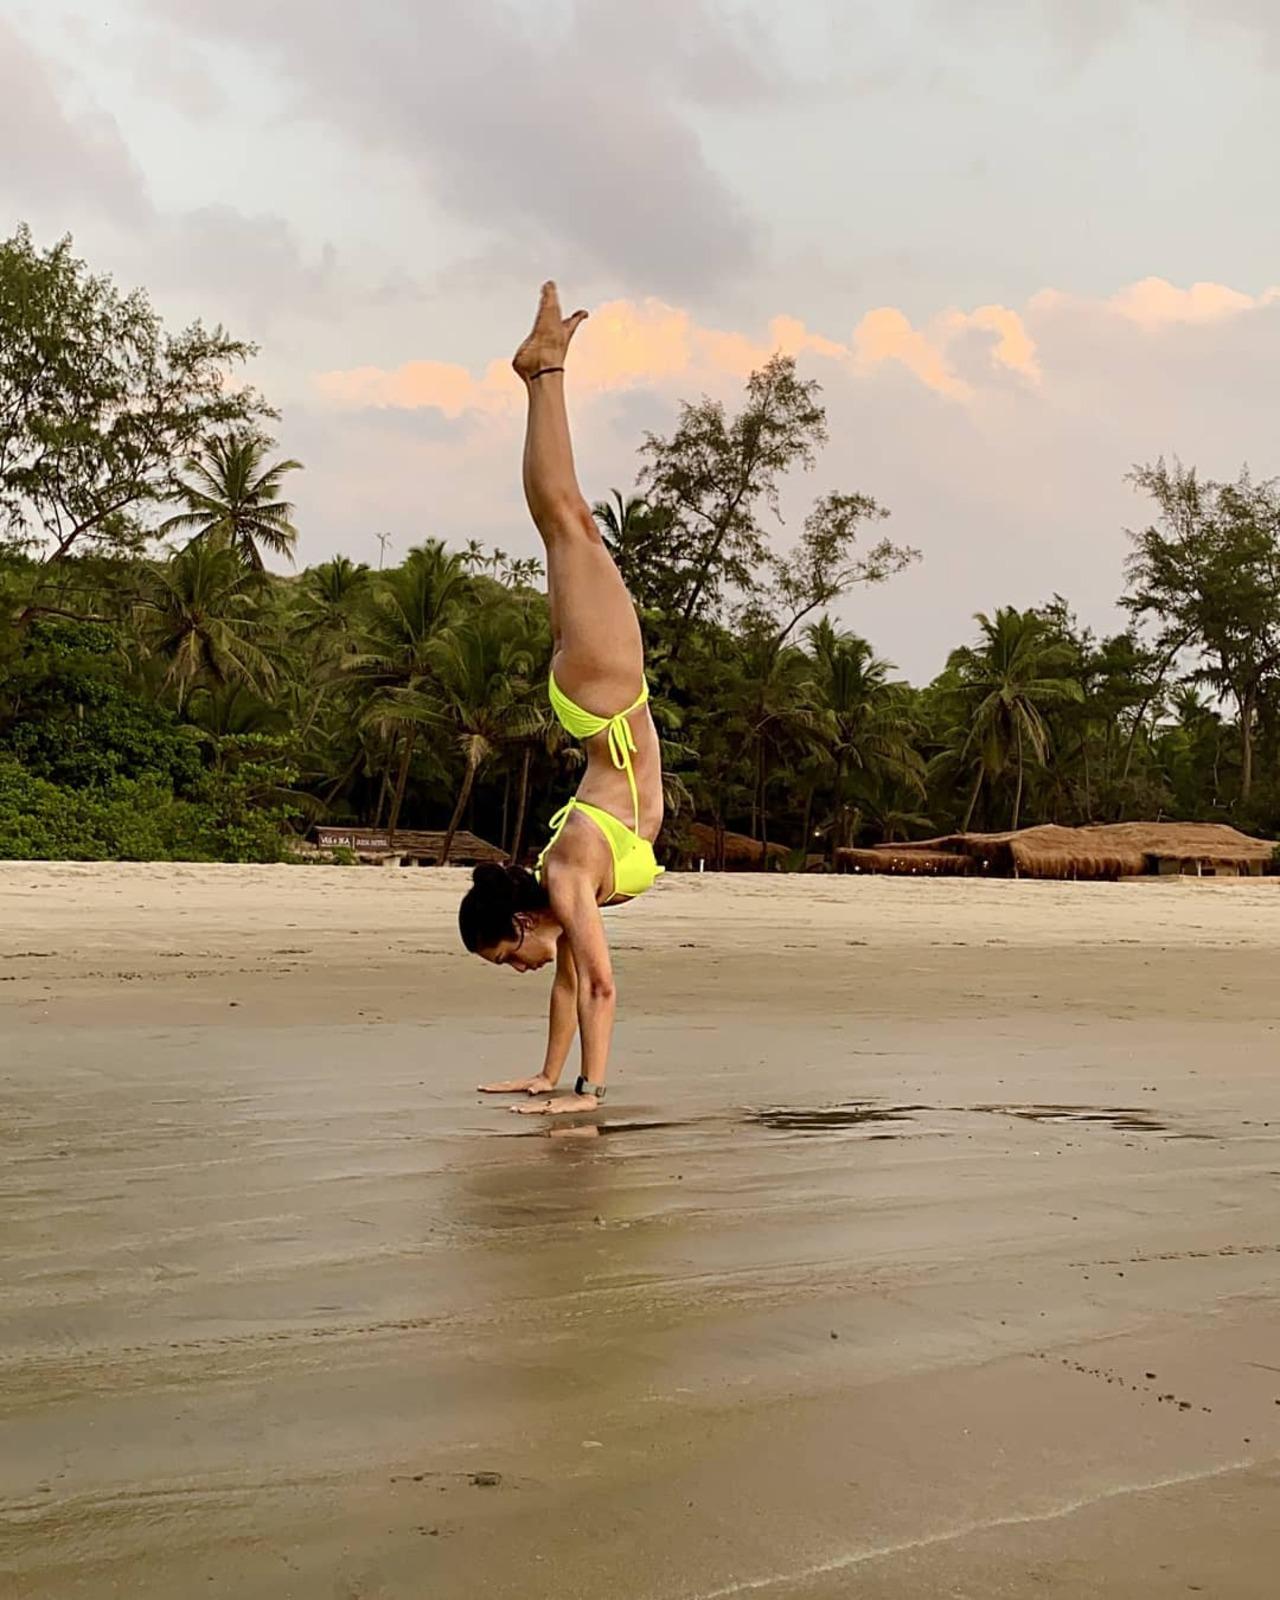 Abigail Pande keeps posting pictures and videos of herself doing difficult yoga poses, which always inspire us